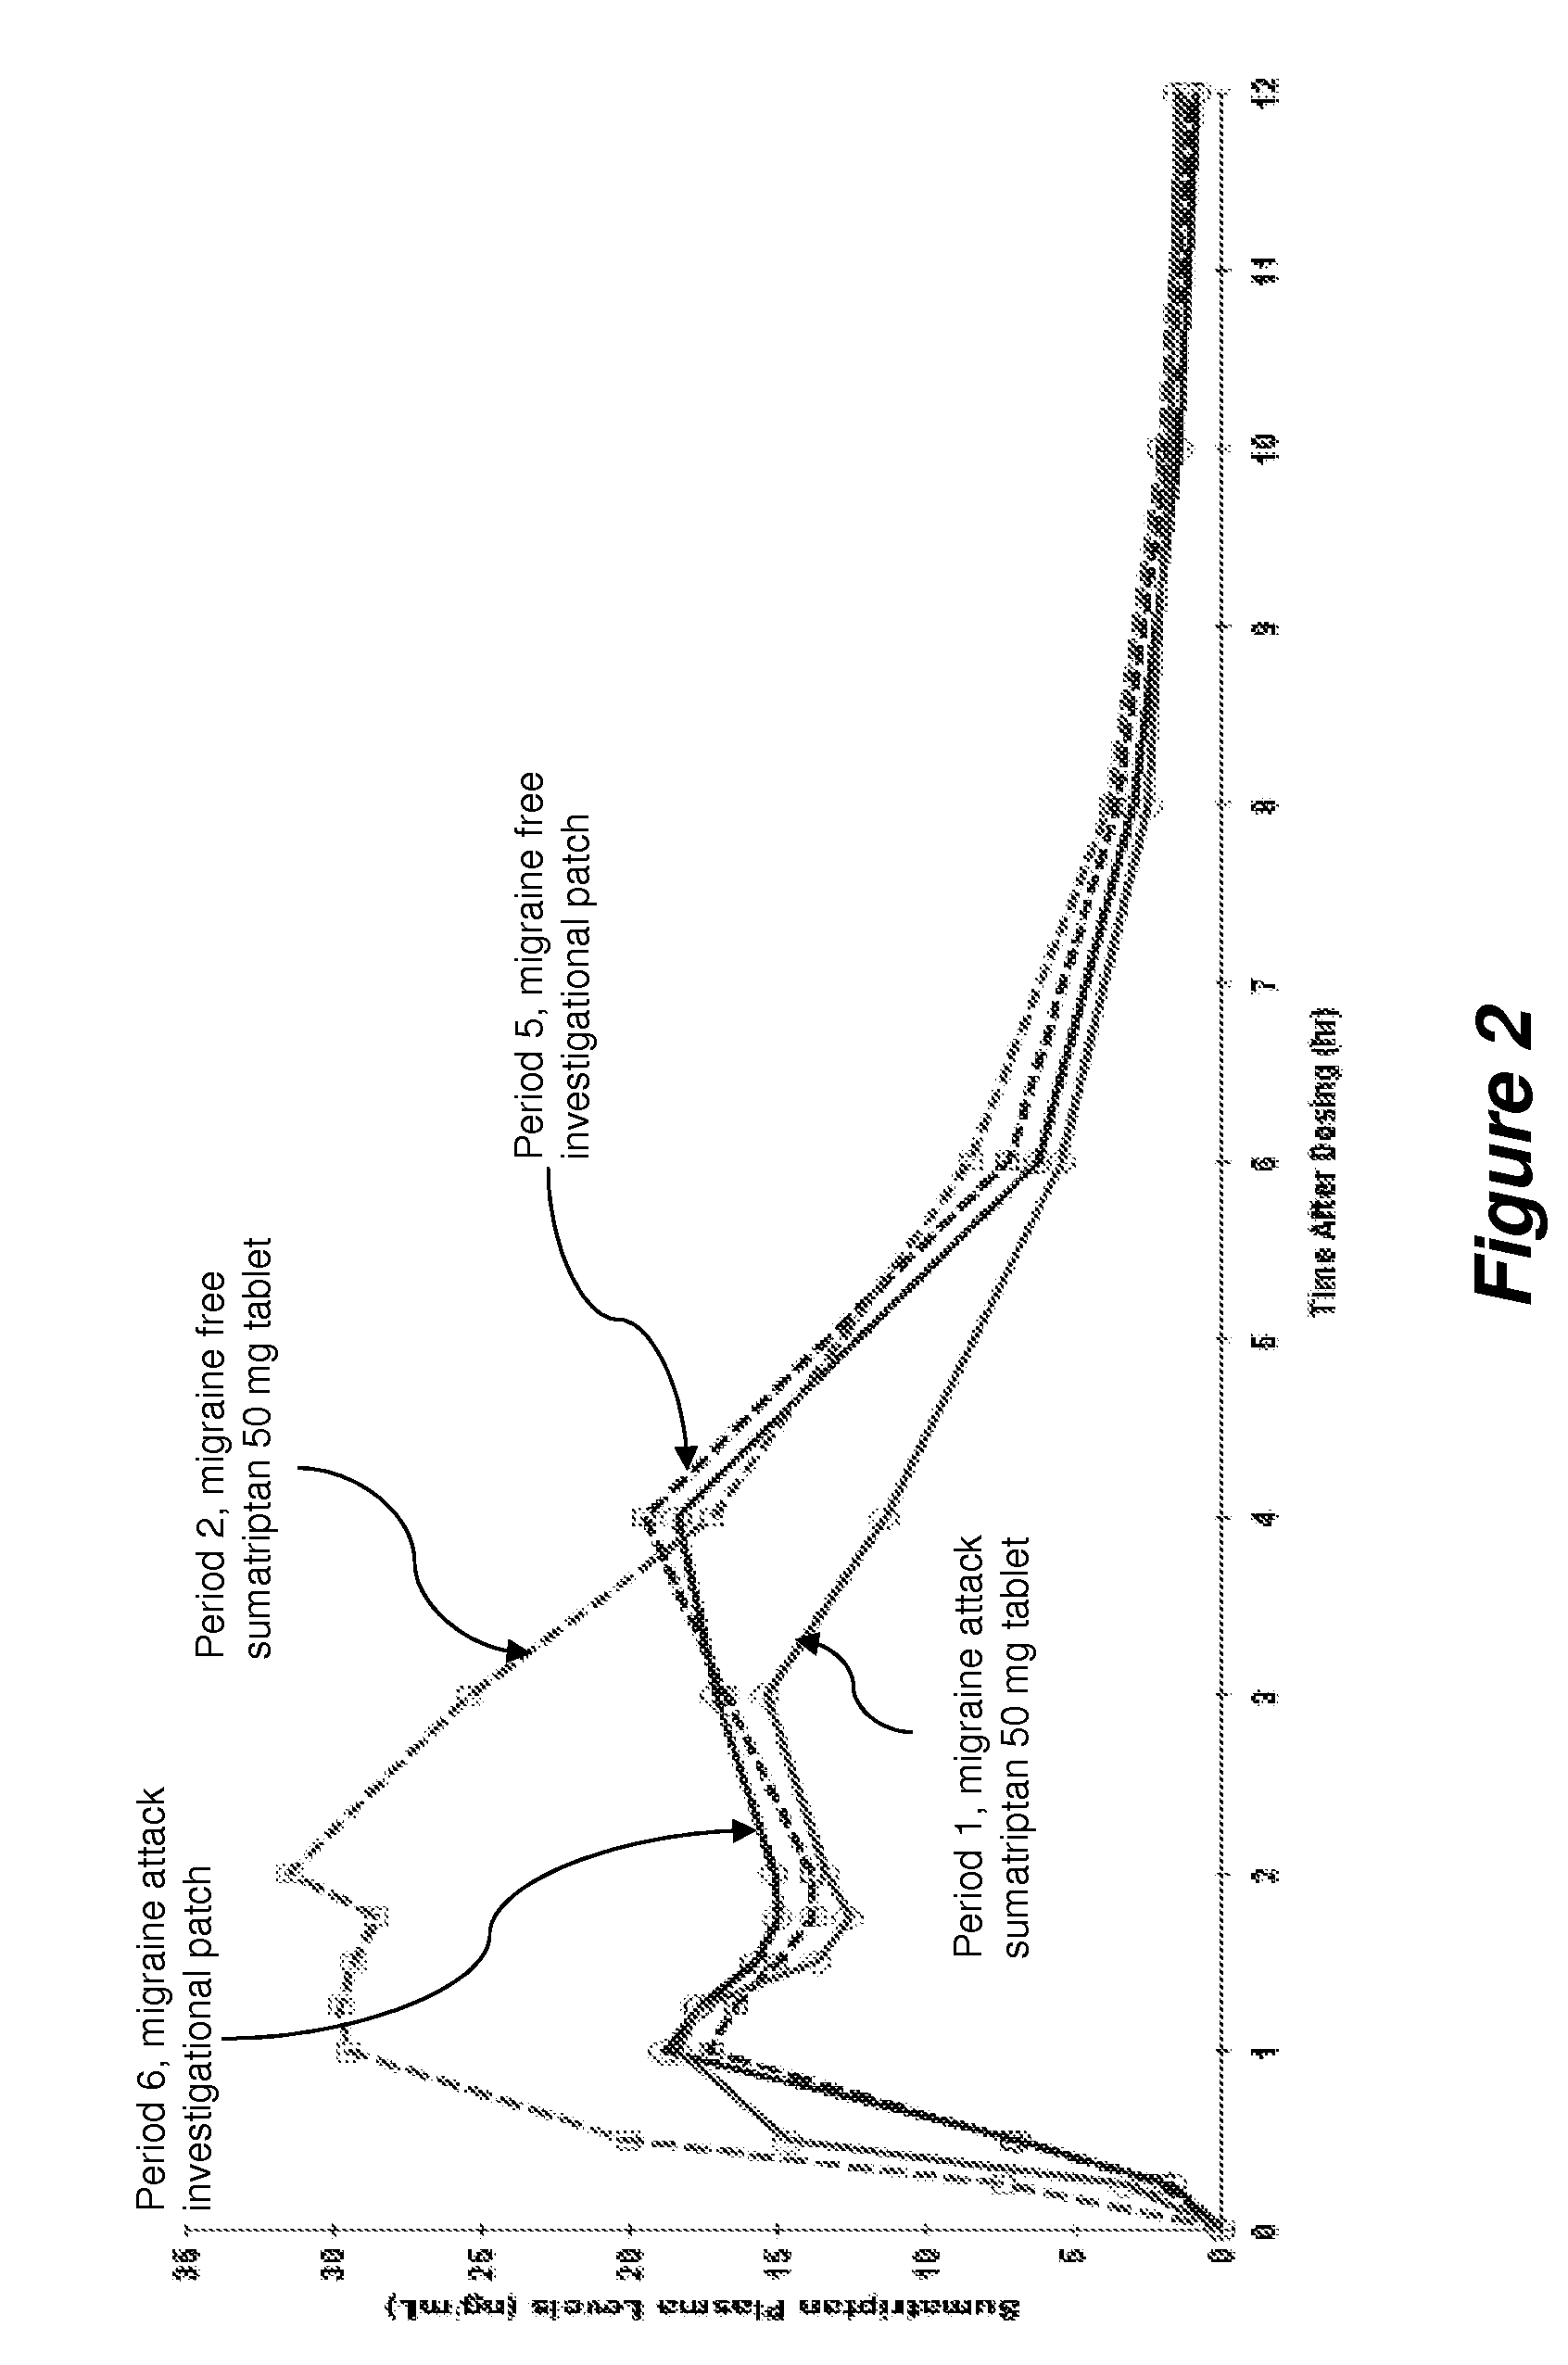 Methods for iontophoretically treating nausea and migraine